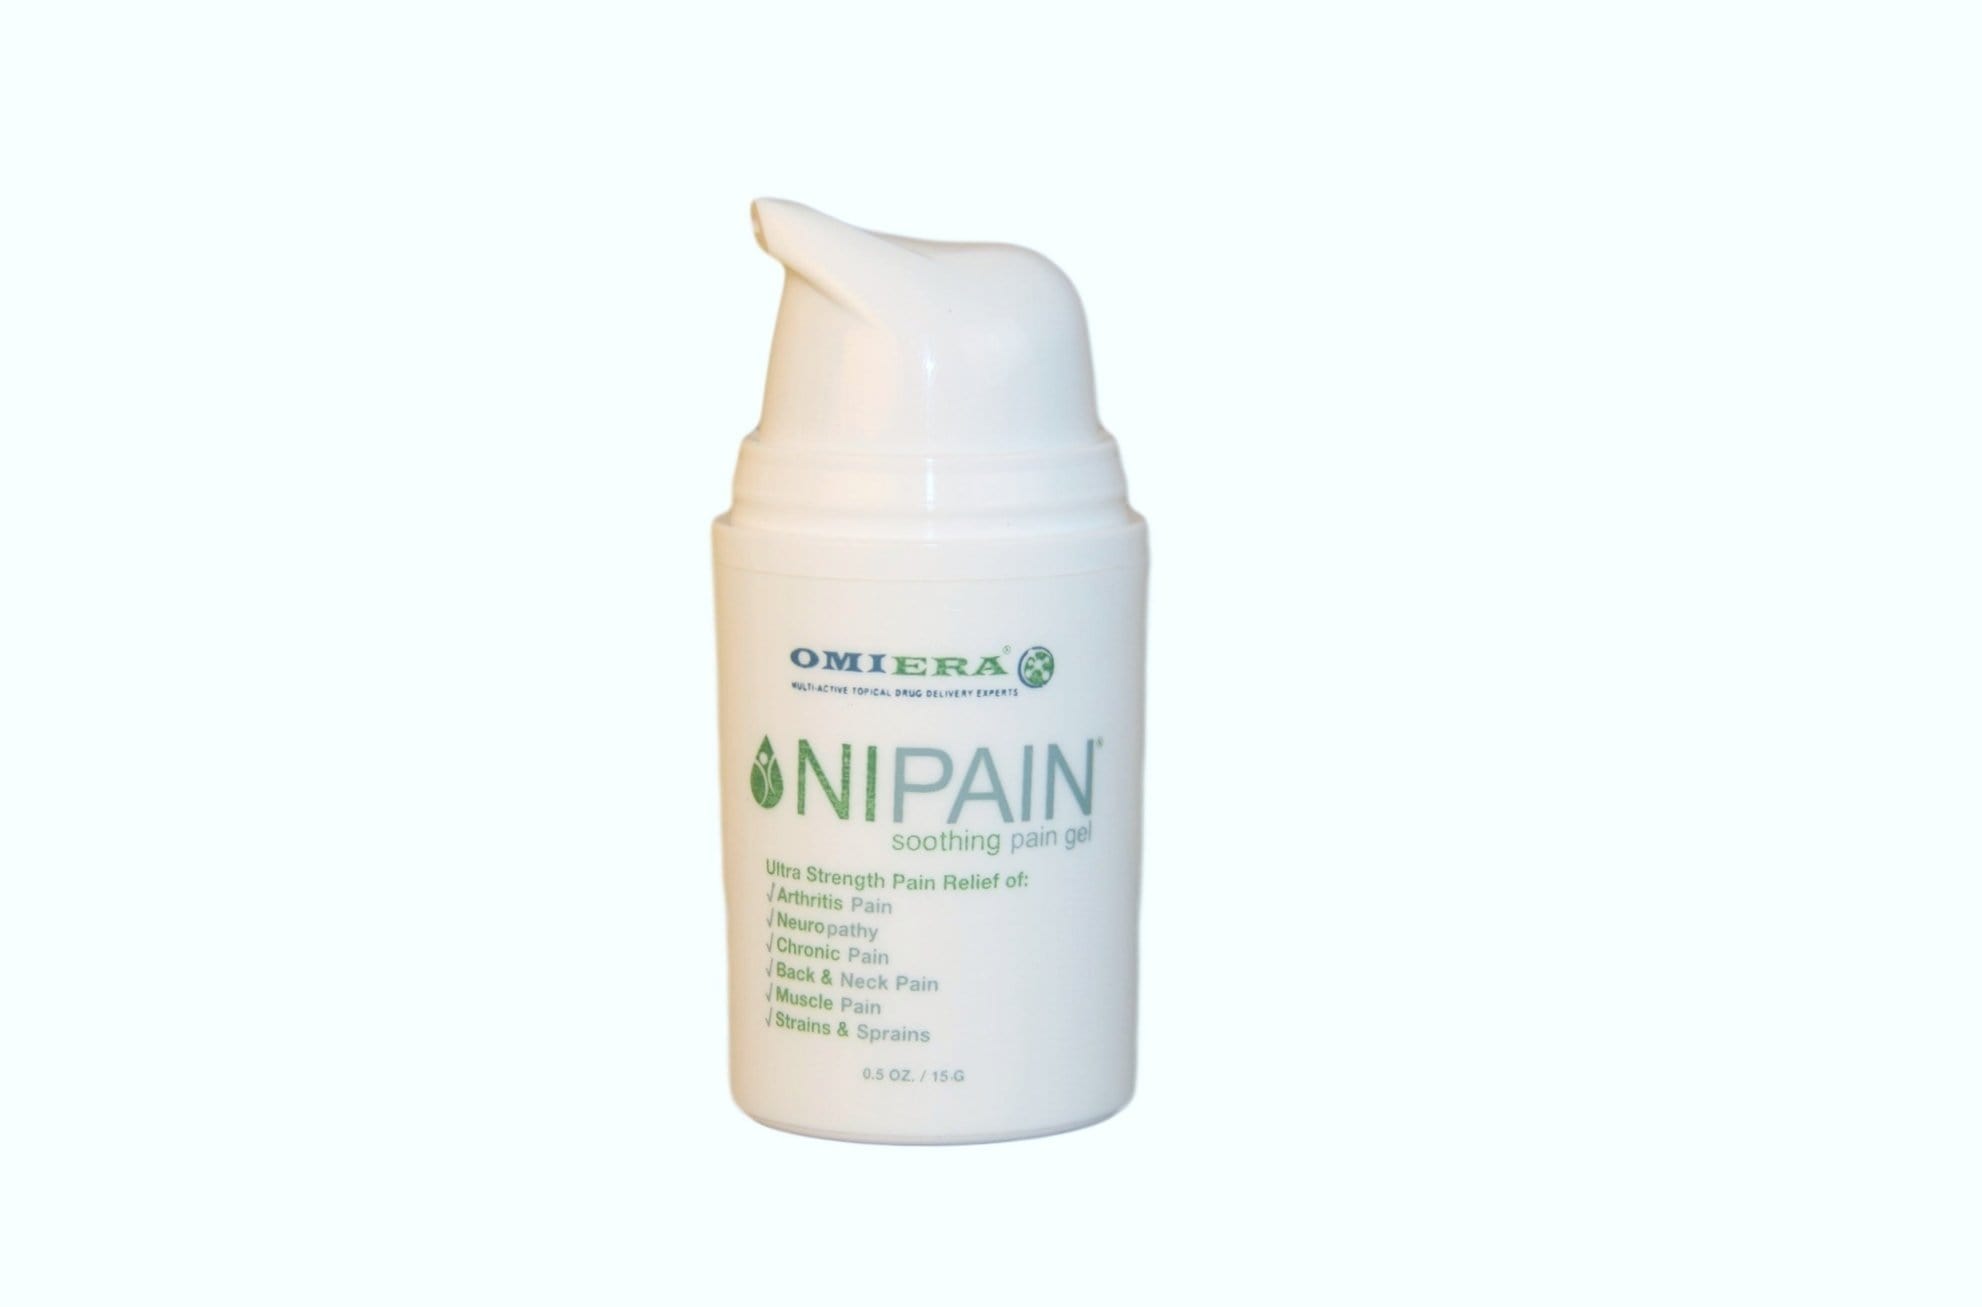 OMIERA LABS CREAM 15 g Omiera Labs Nipain Fast, Natural, and Odor Free, Pain Relief Cream